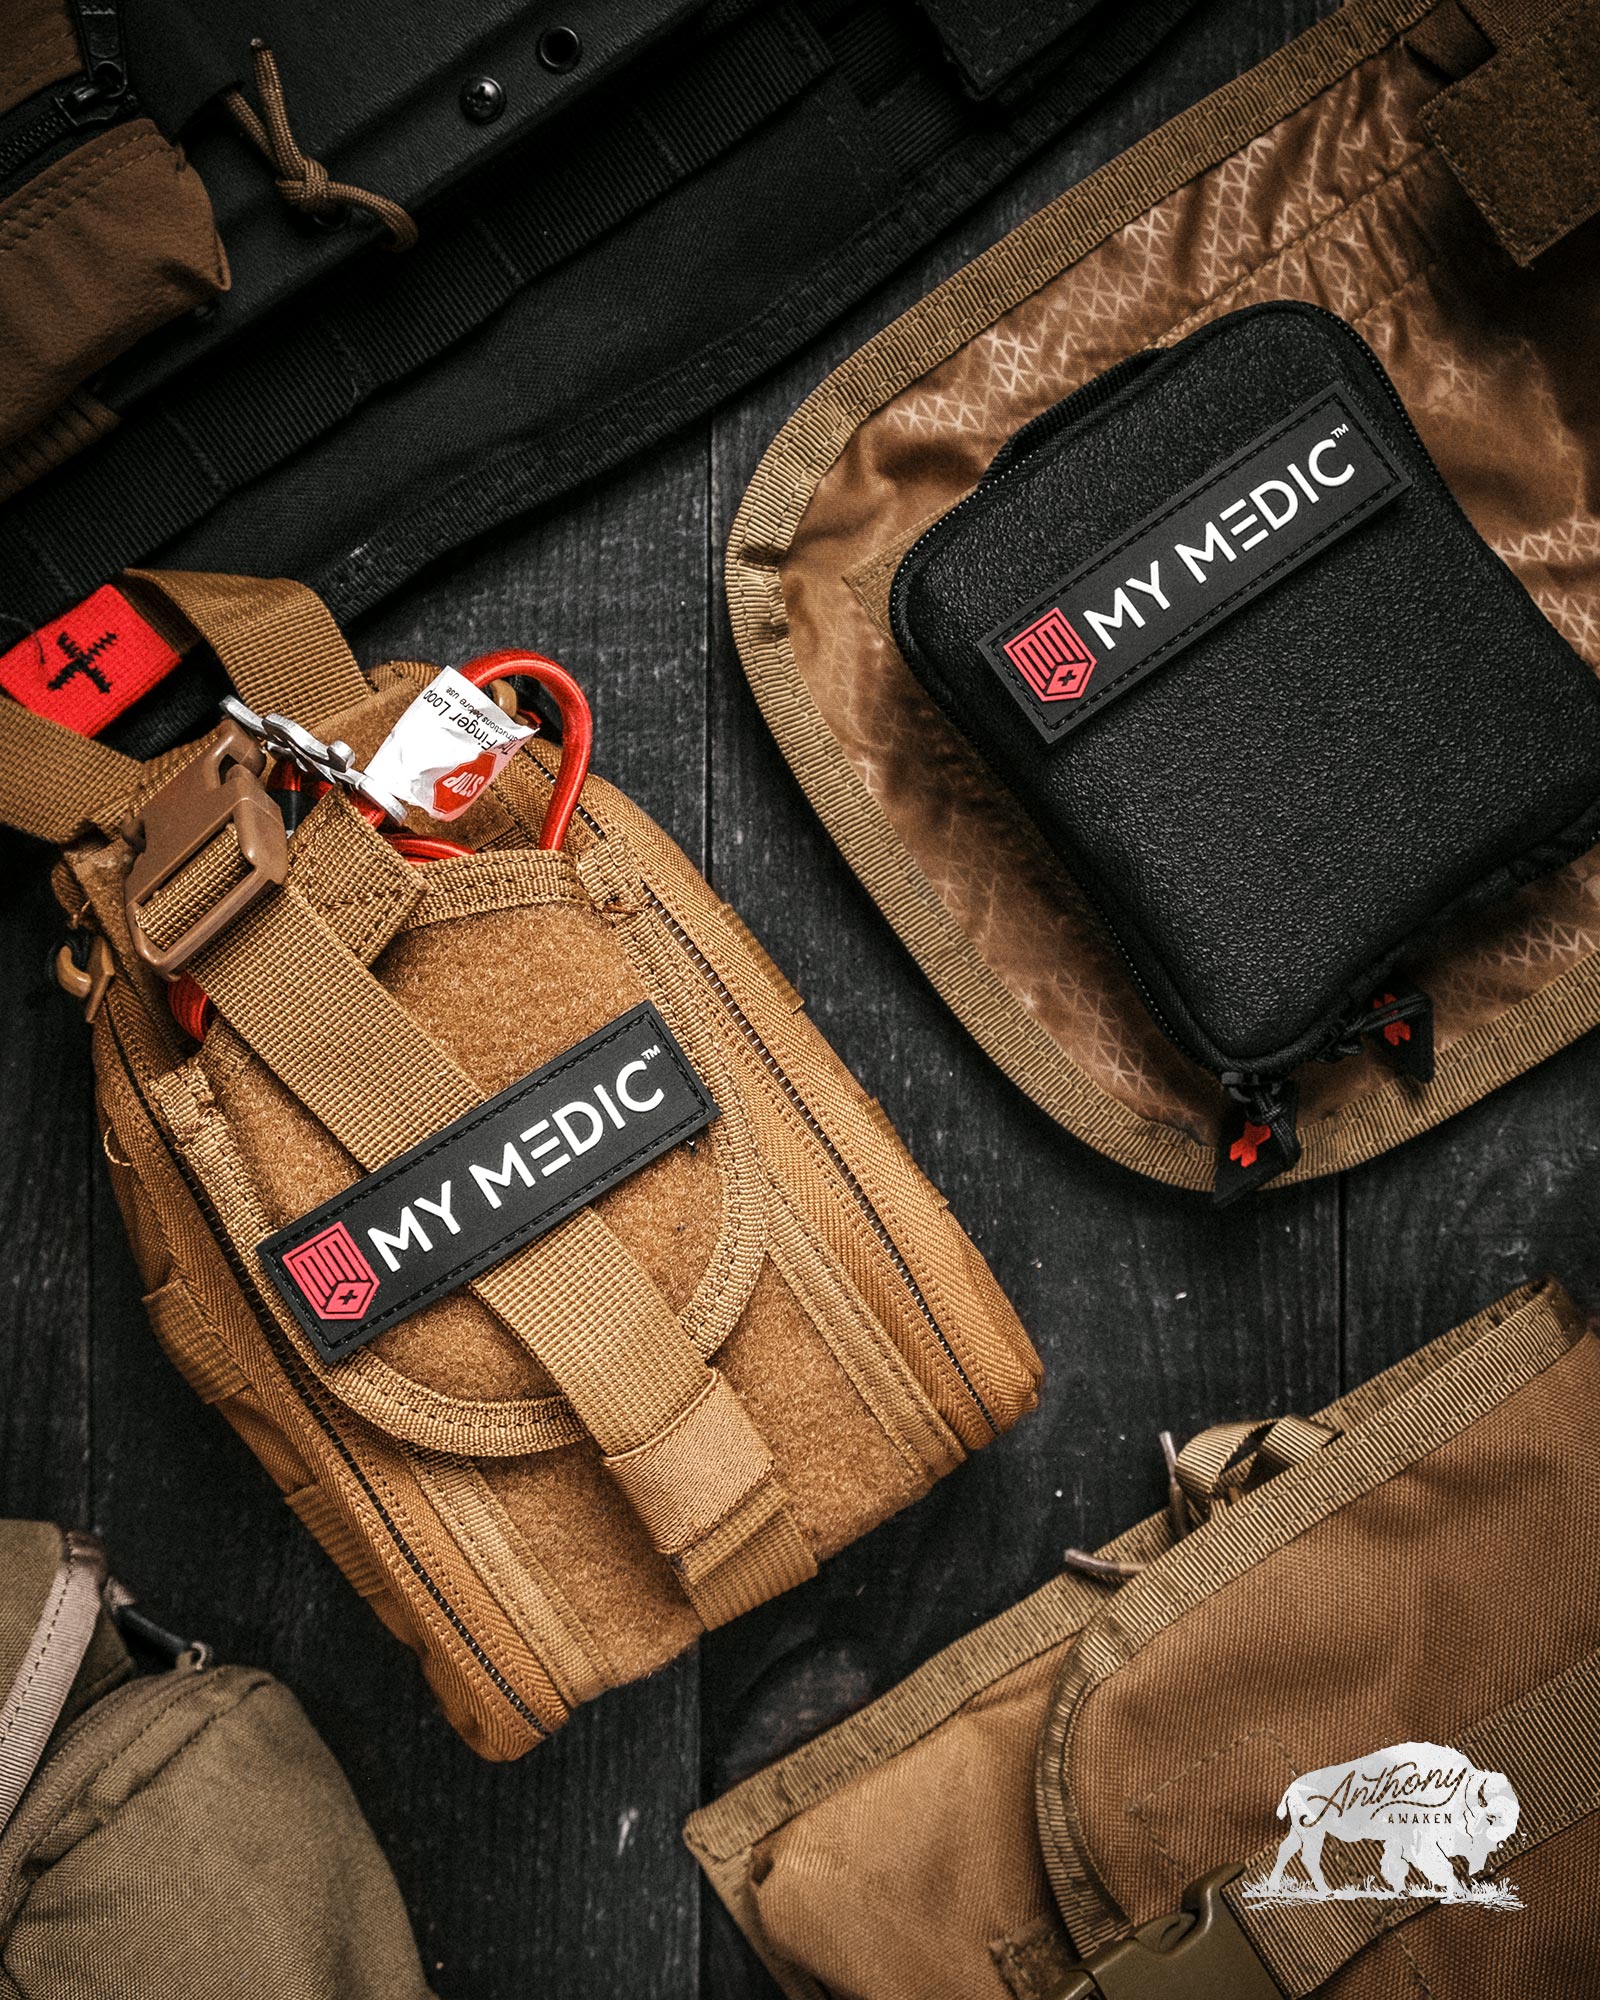 My Medic First Aid Kit Review